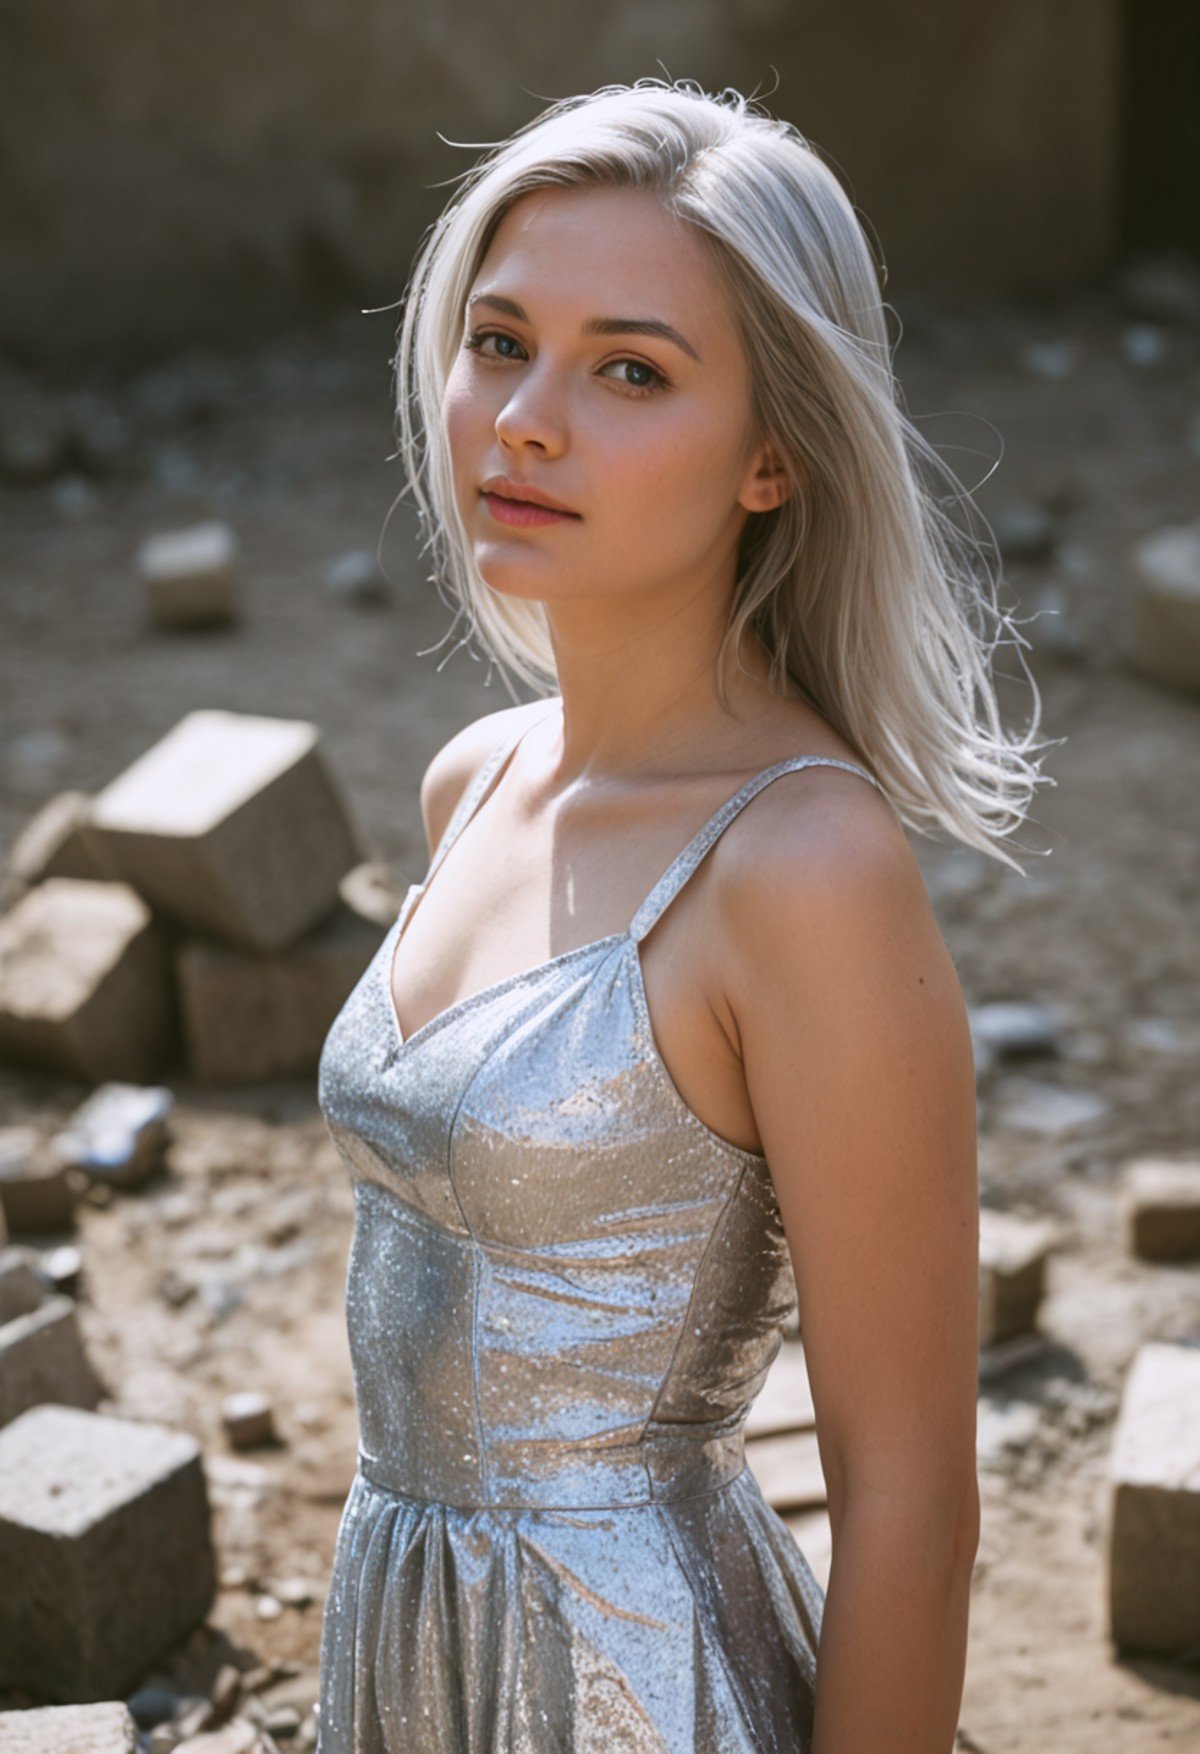 score_9, score_8_up, score_7_up, score_6_up, BREAK , source_real, raw, photo, realistic BREAK 1girl,silver hair,beautiful facial features,silver dress,standing,cube,debris,stone,floating objects,geometric object,silver theme,dreamy mottled background,depth of field gradient,close-up,